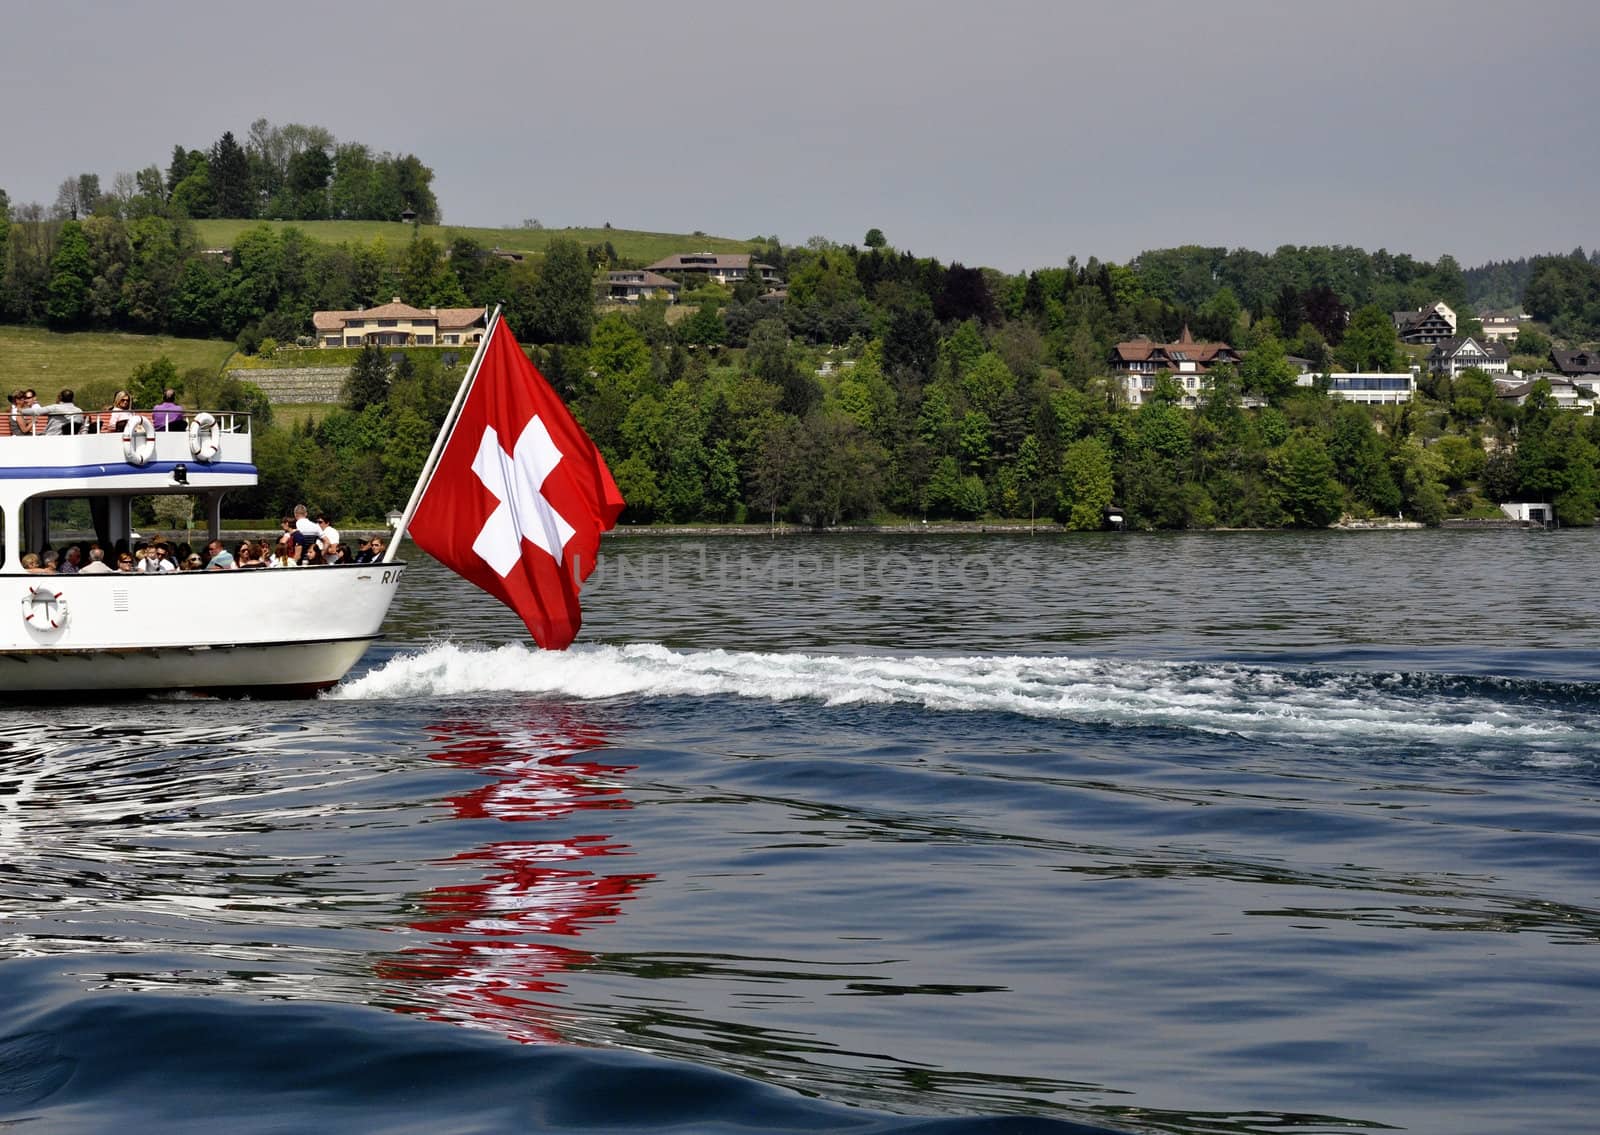 Swiss flag in boat, during summer. Lake and mountains in the back.